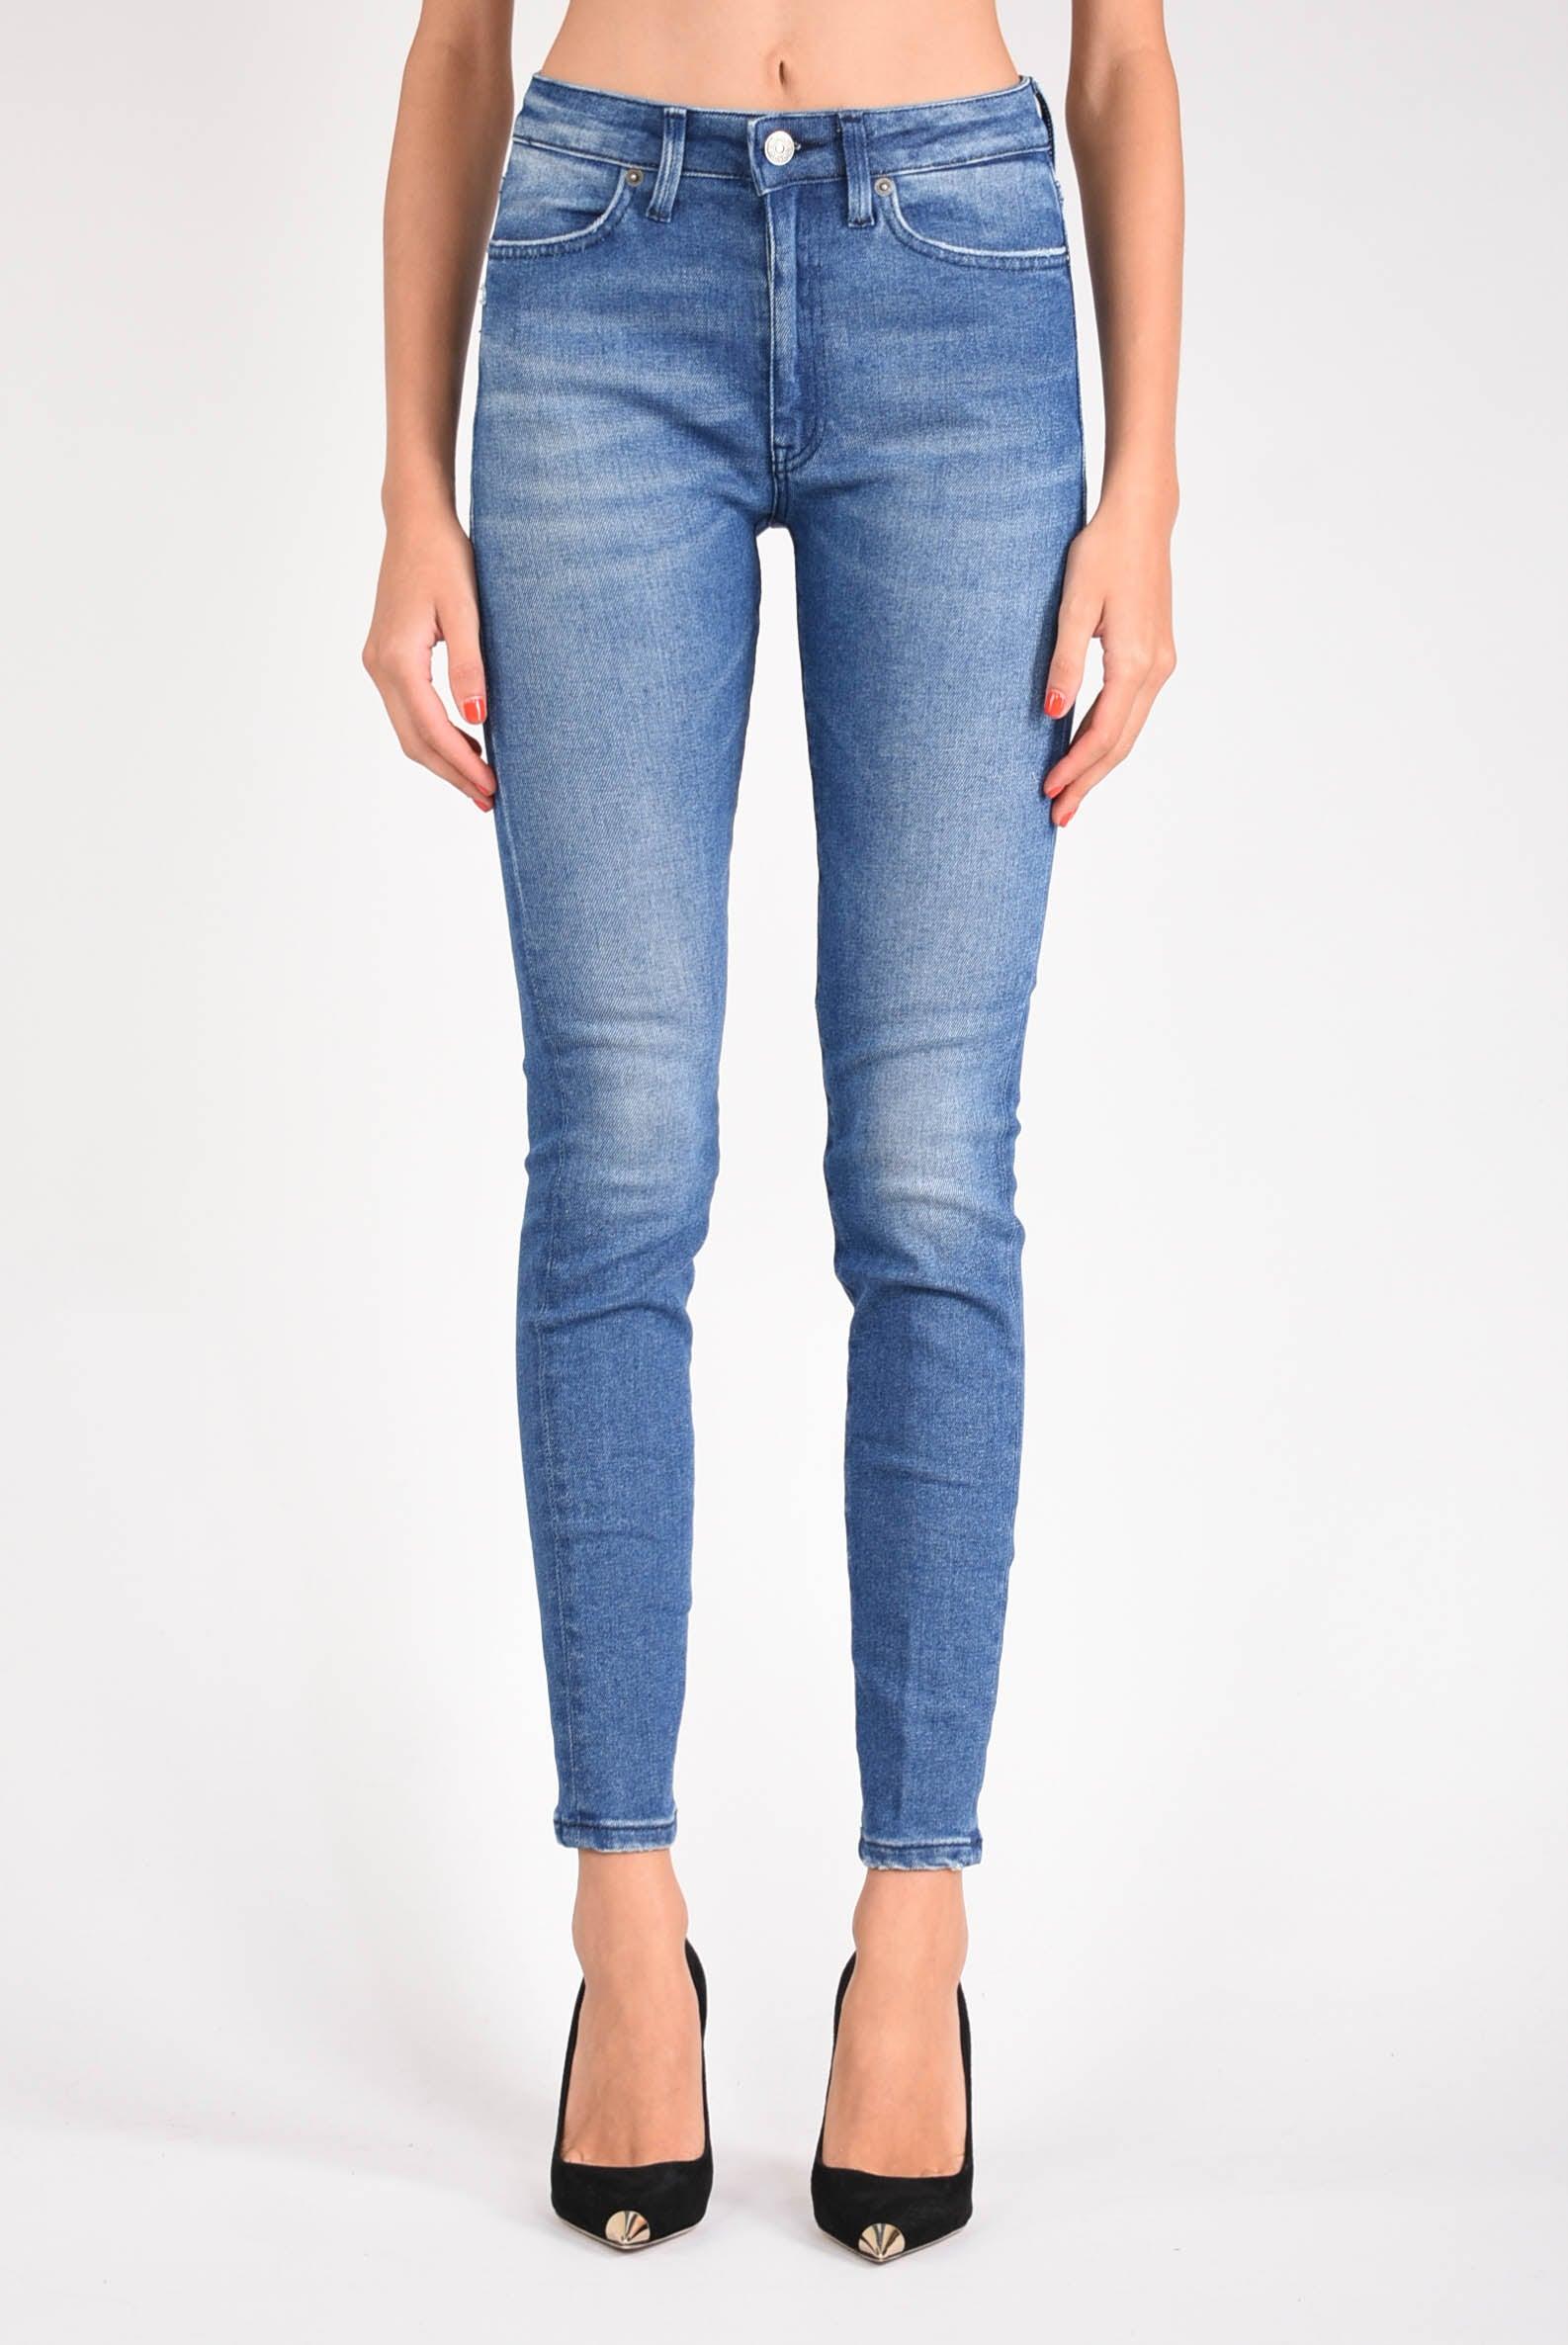 Dondup Jeans Skiny Iris Model in Blue | Lyst Canada